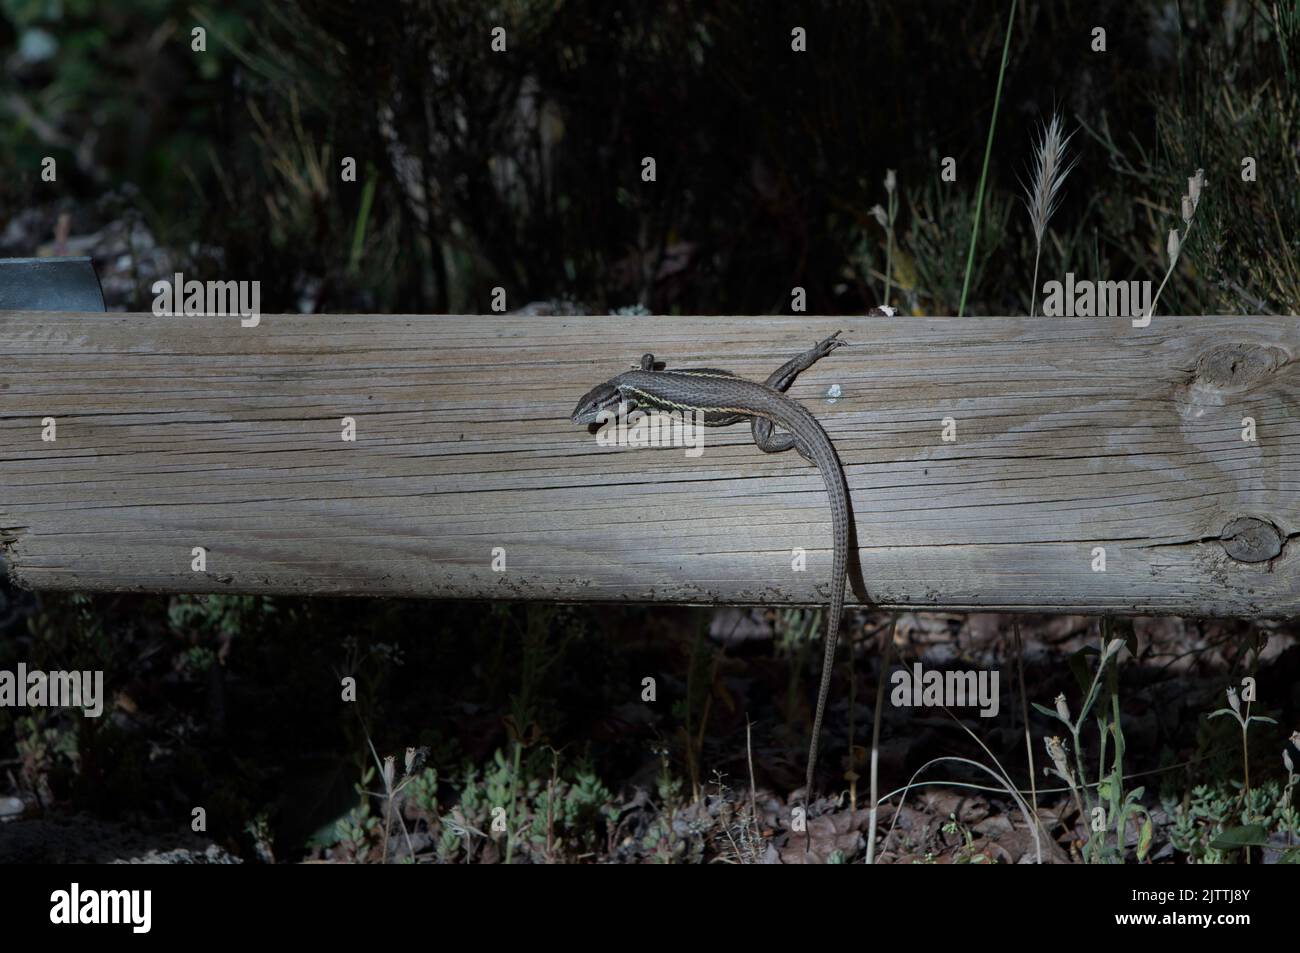 A grey lizard on a log in the wilderness under the sun Stock Photo